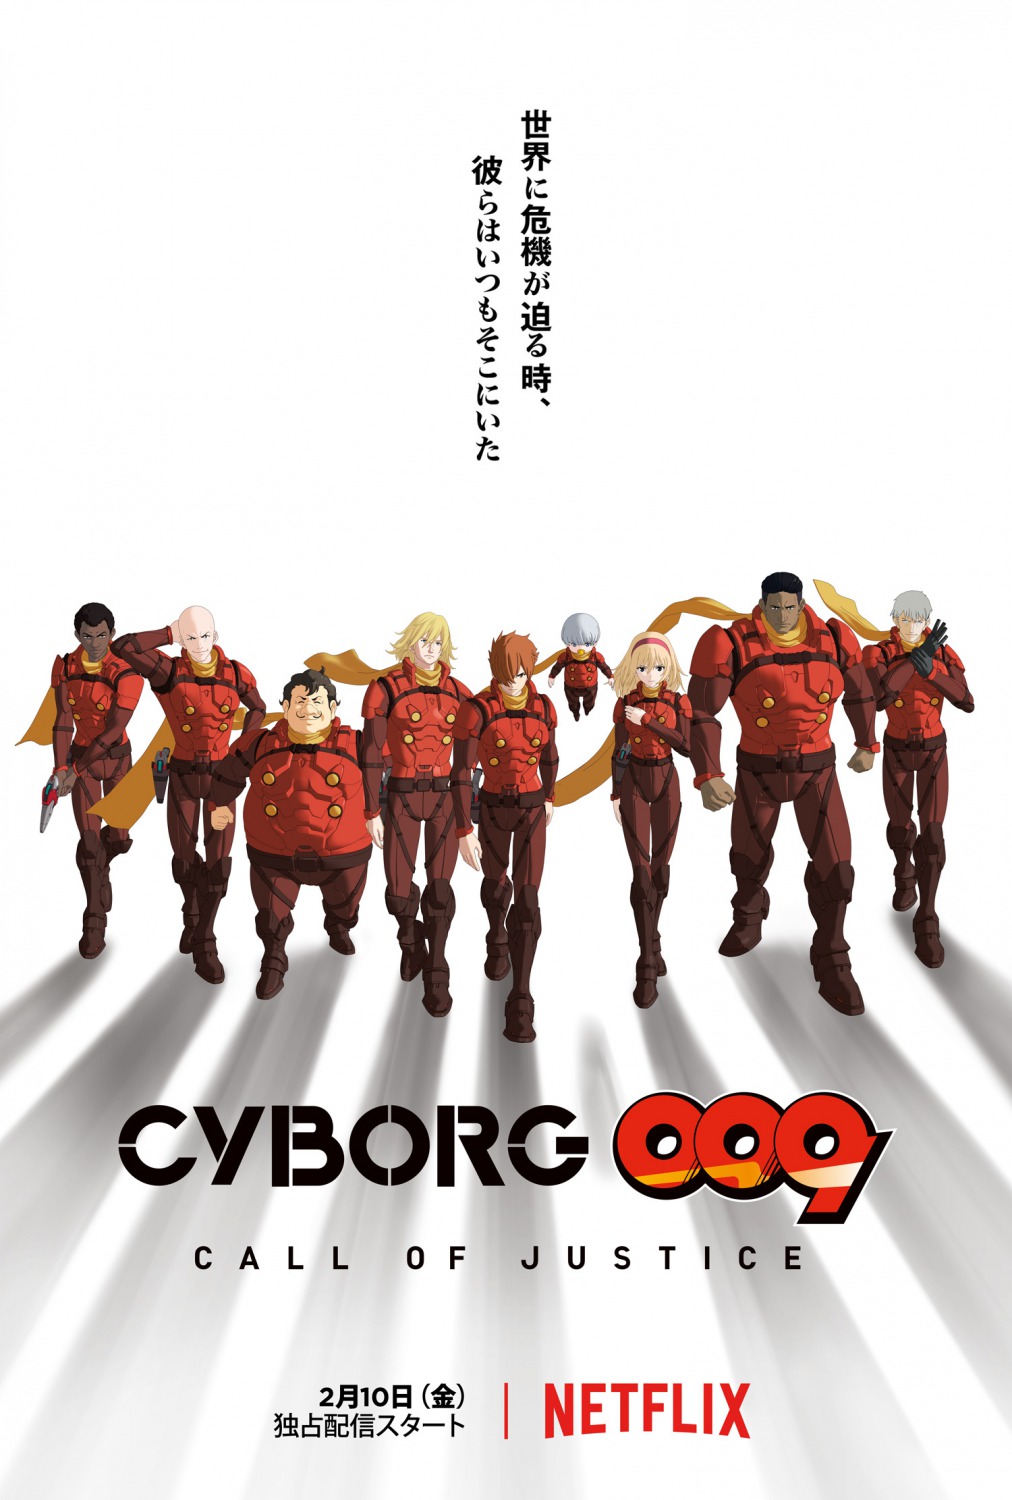 Extra Large TV Poster Image for Cyborg 009: Call of Justice I 